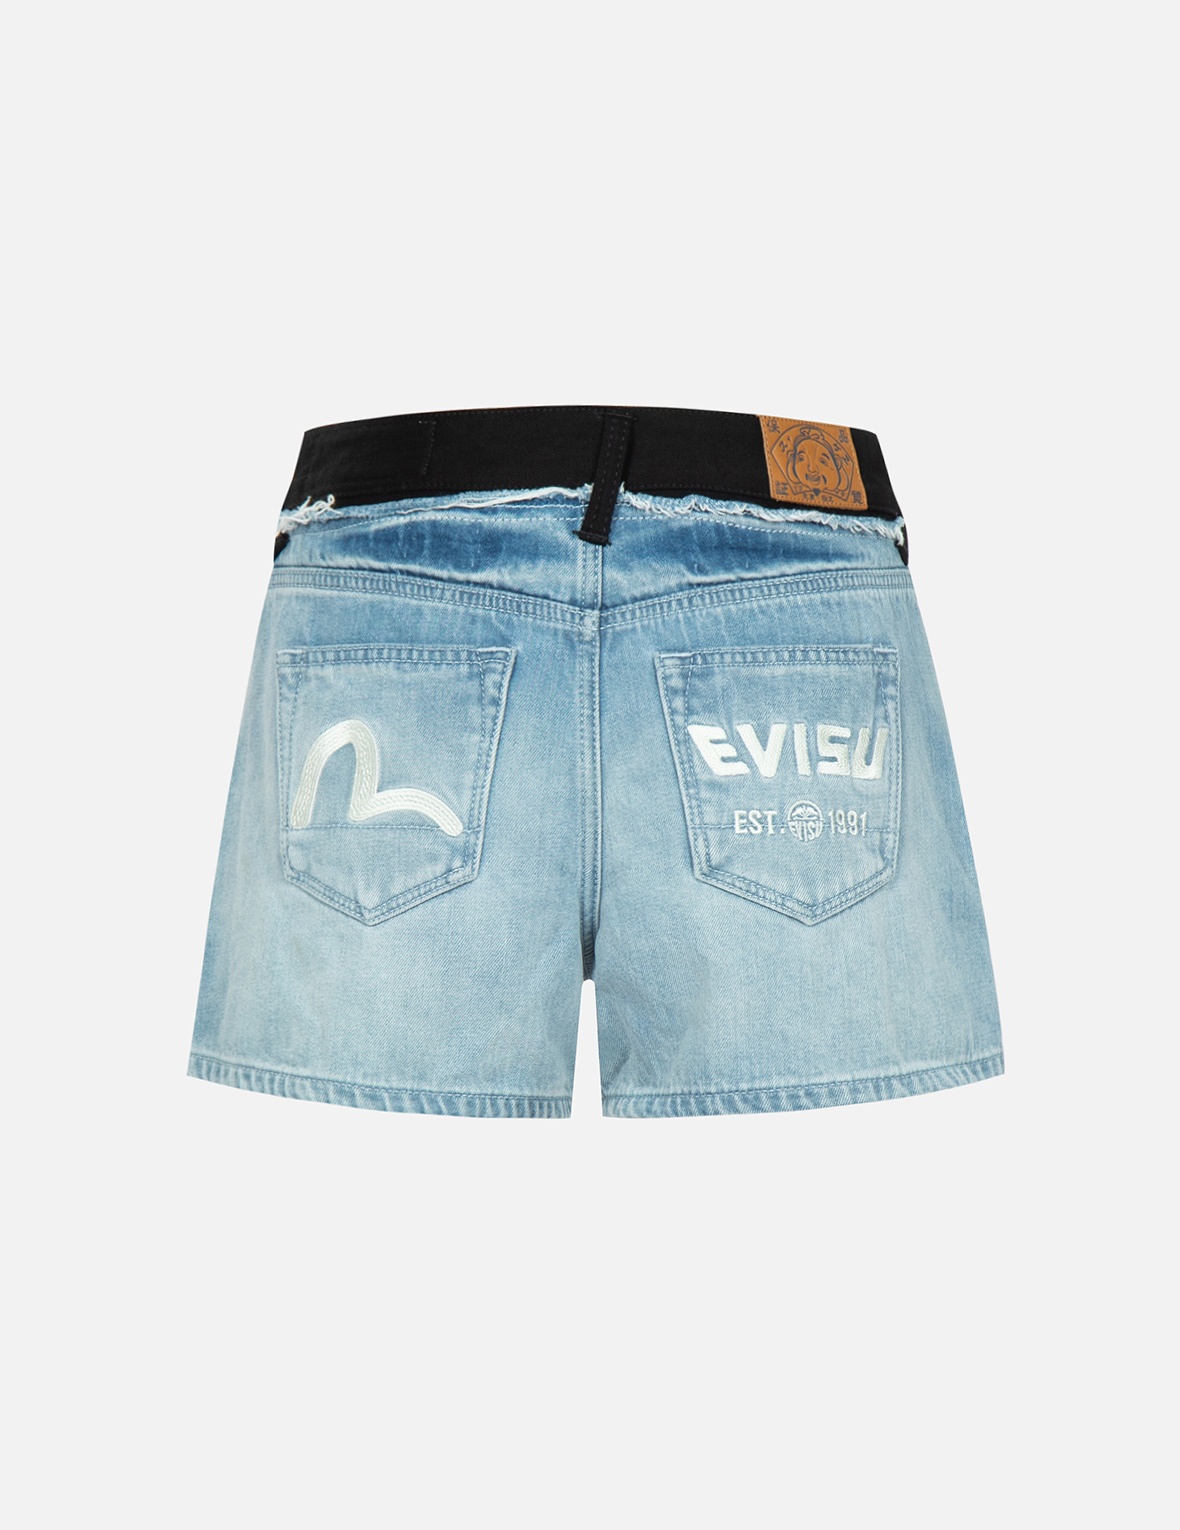 SEAGULL AND LOGO EMBROIDERY RECONSTRUCTED DENIM SHORTS - 1